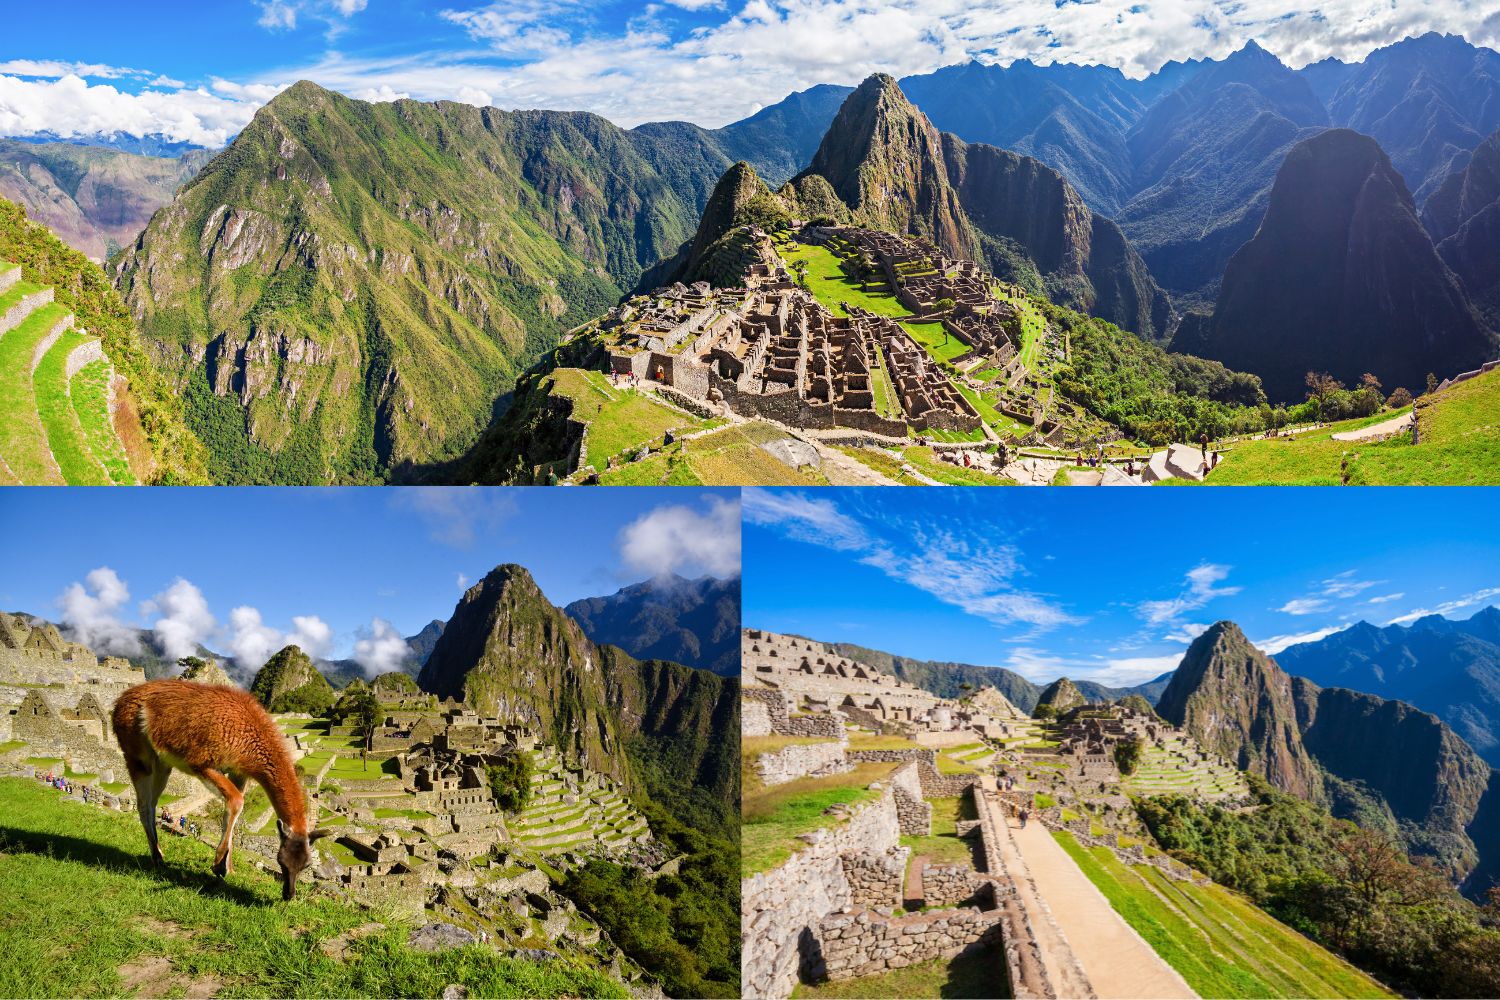 What is the best time to visit Machu Picchu?